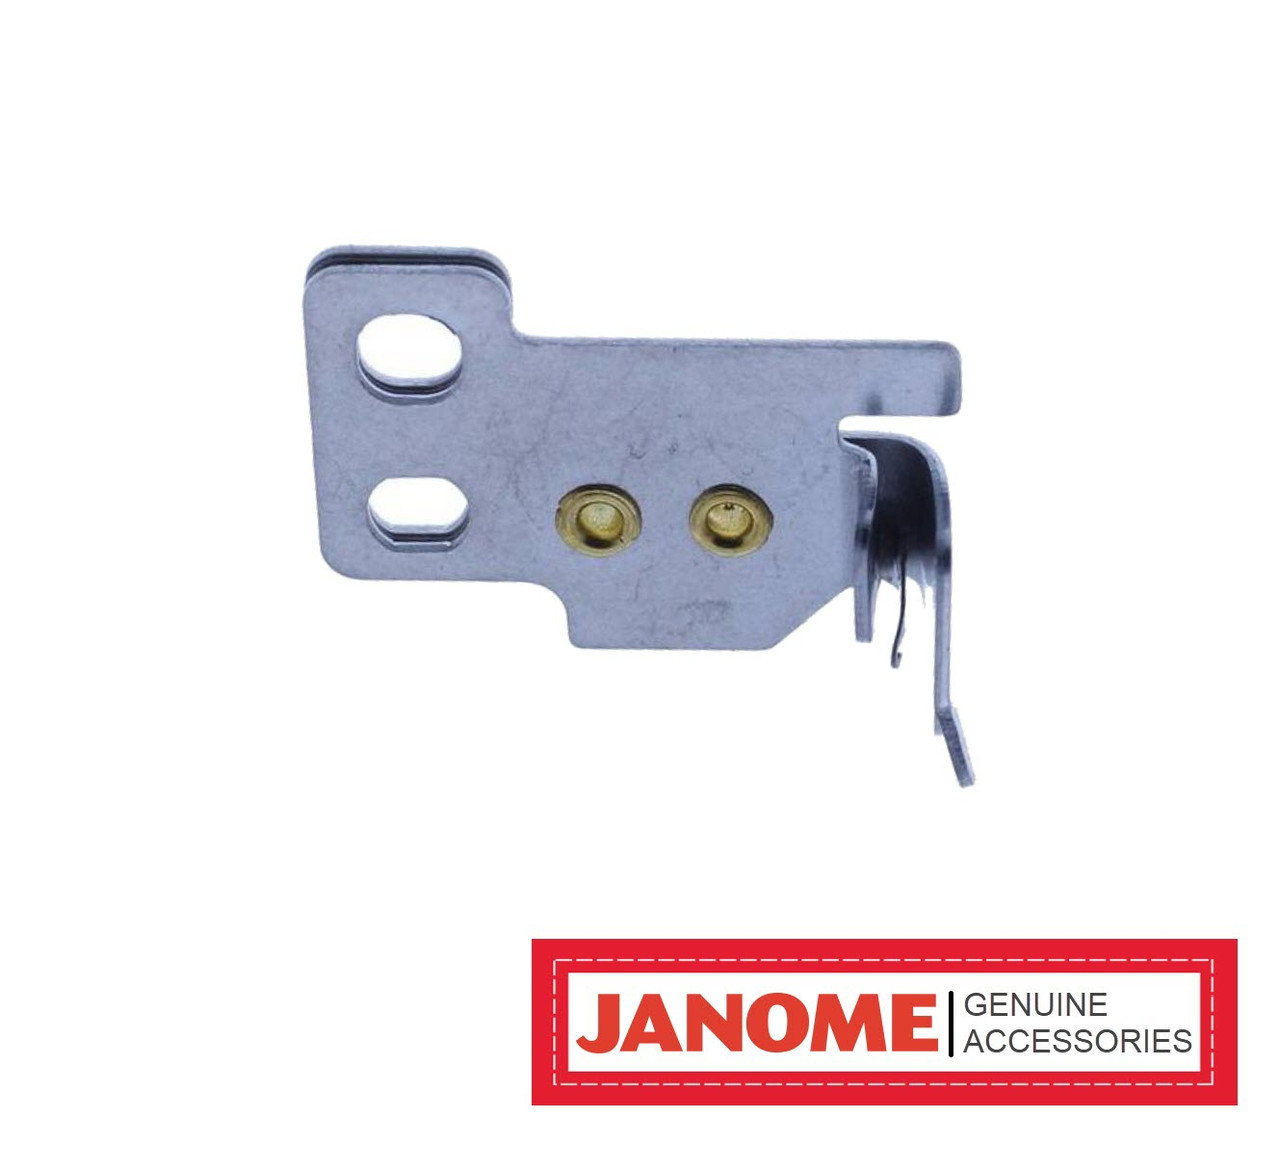 Janome Needle Threader for All Models